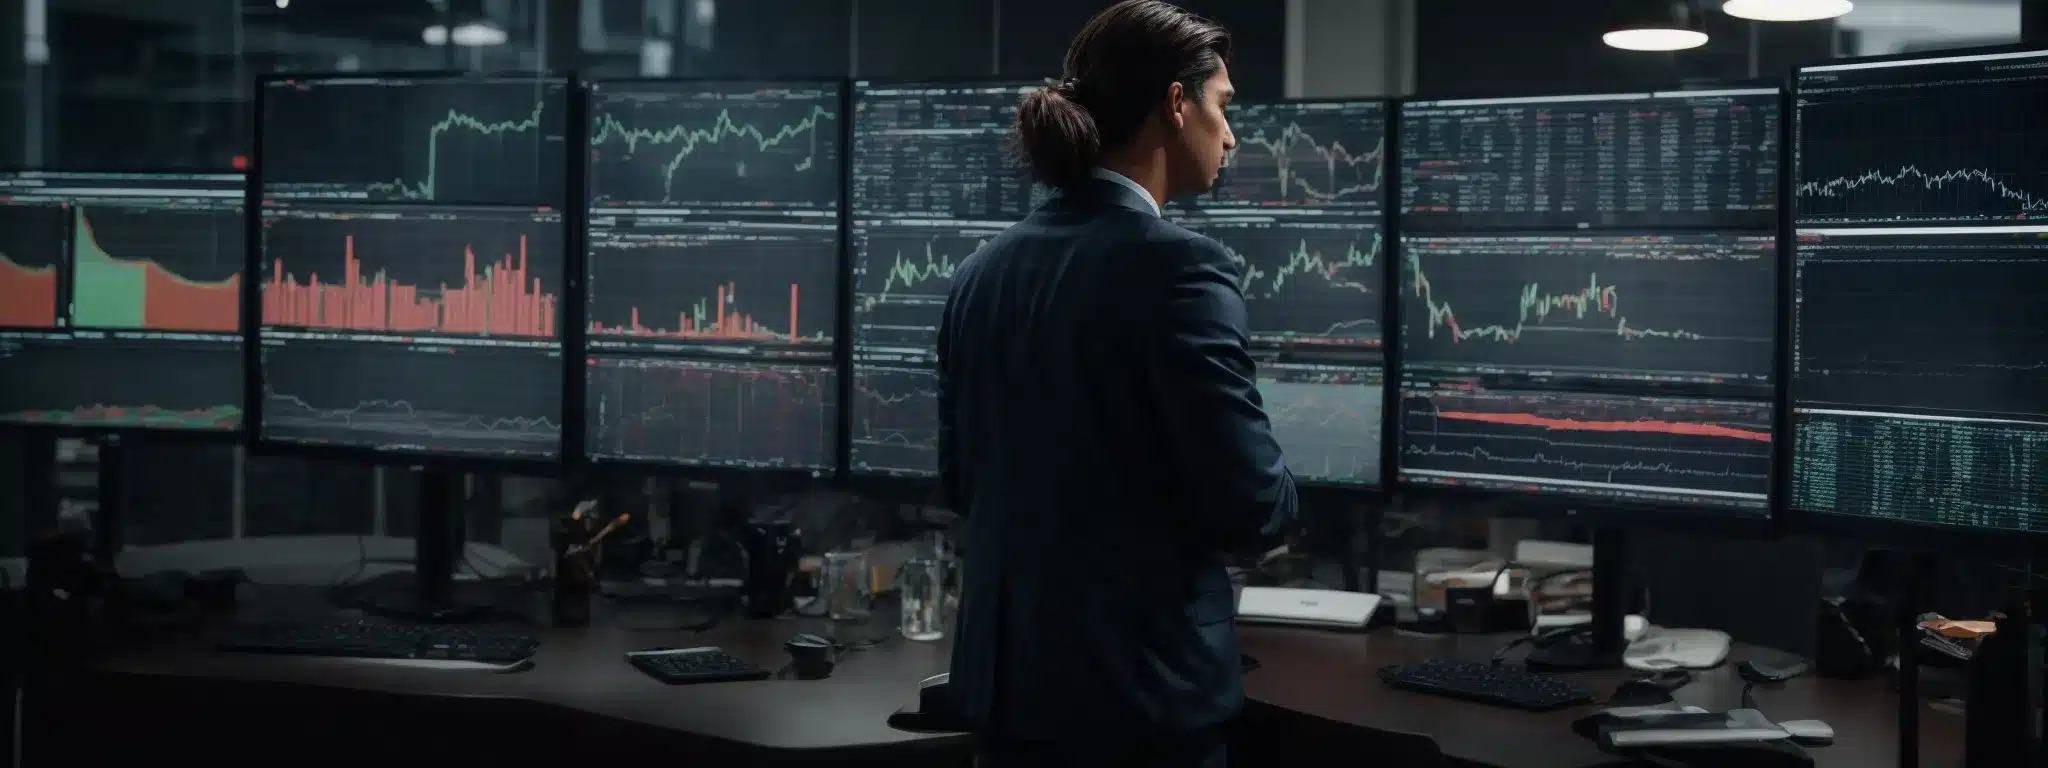 A Marketer Standing Before An Array Of Monitors Displaying Graphs, Charts, And Market Trends While Taking Notes.